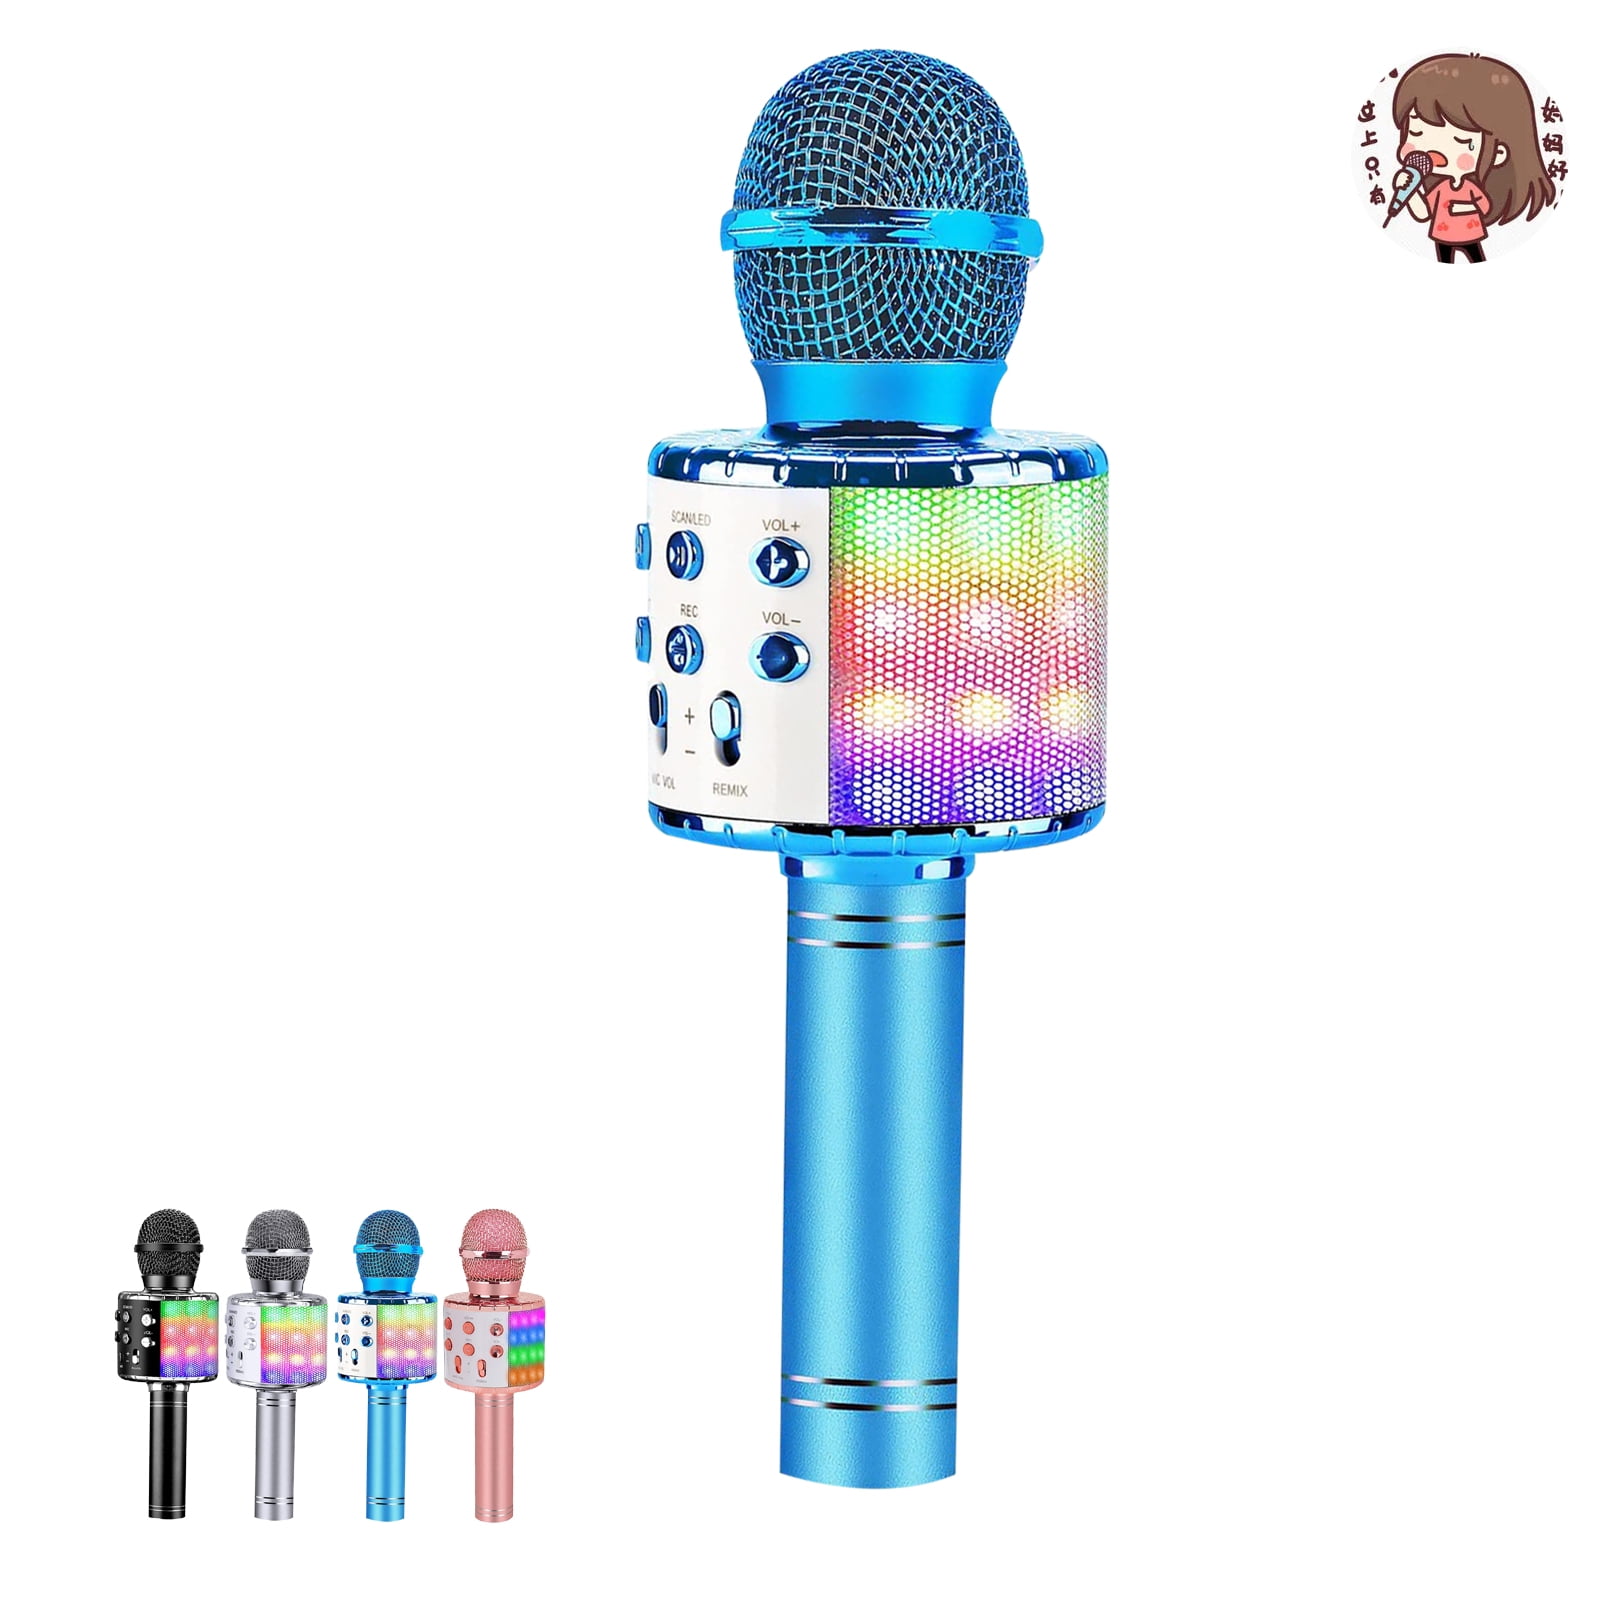 Wireless Bluetooth Karaoke Microphone Portable Handheld Karaoke Mic Speaker with Led Lights for Home Party Birthday Karaoke Microphone for Kids Blue Gift for 4-12 Year Old Girls Boys Singing